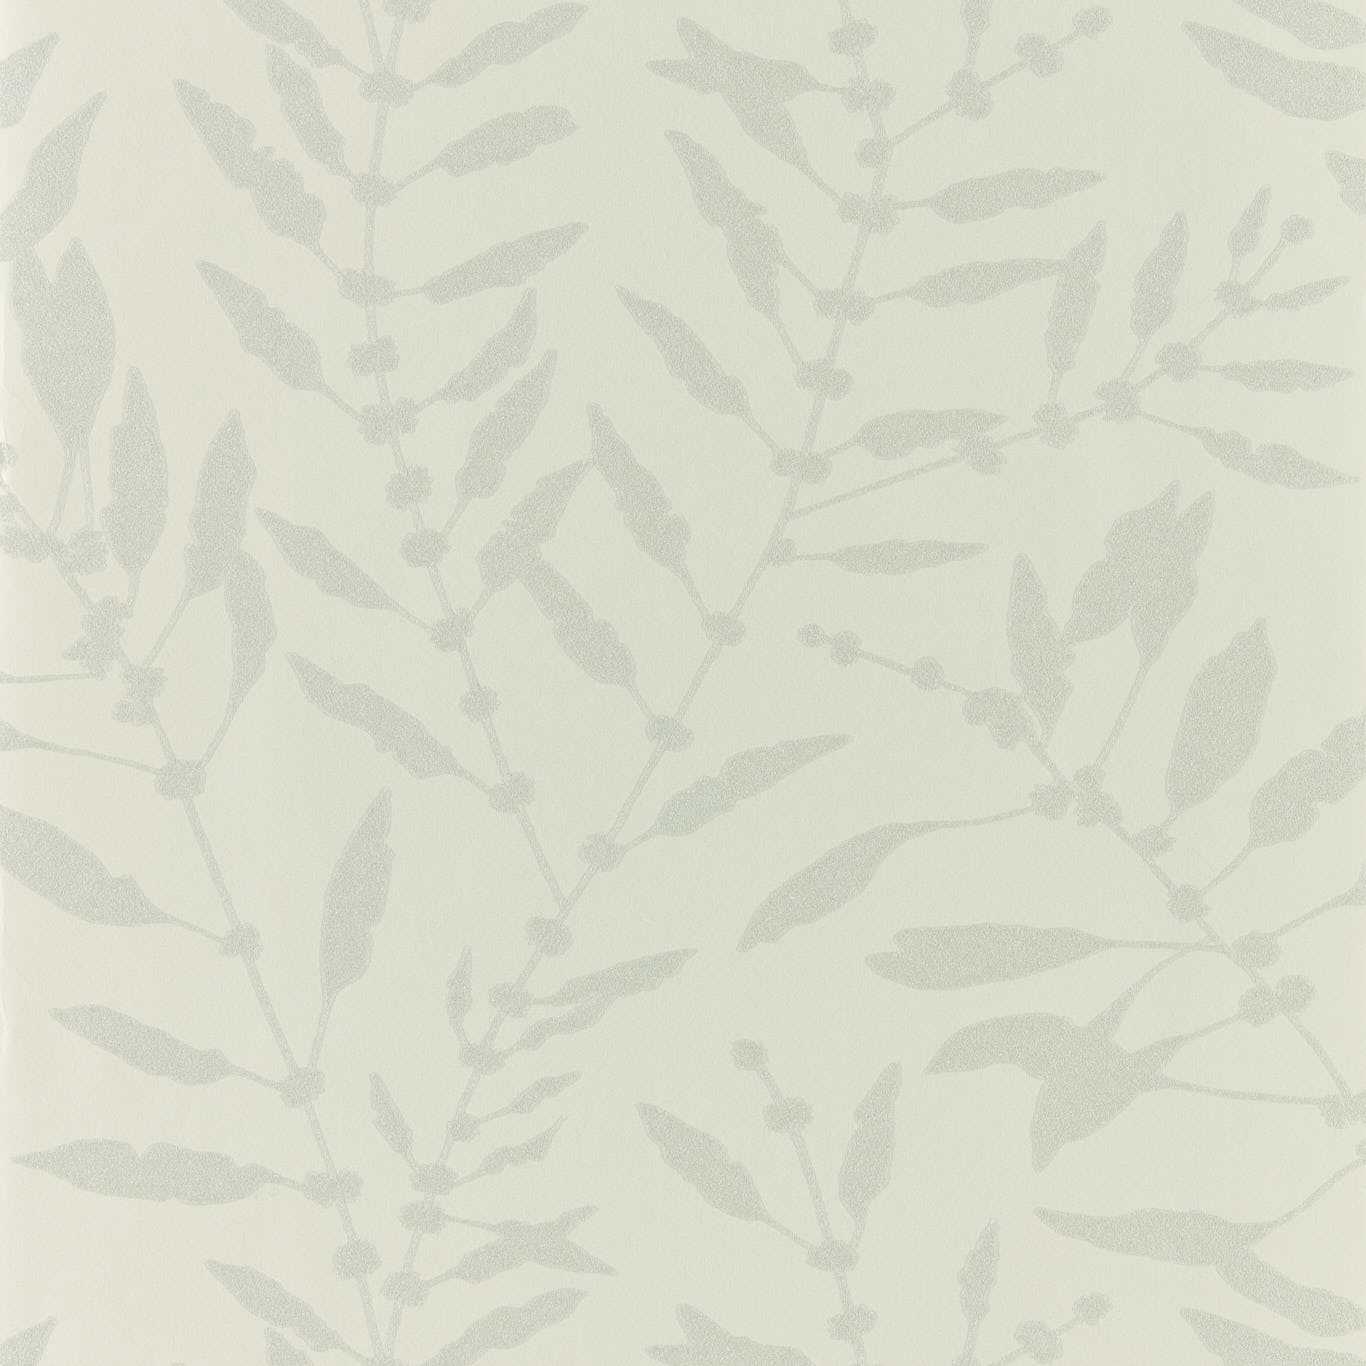 Chaconia Shimmer Sand Wallpaper by HAR